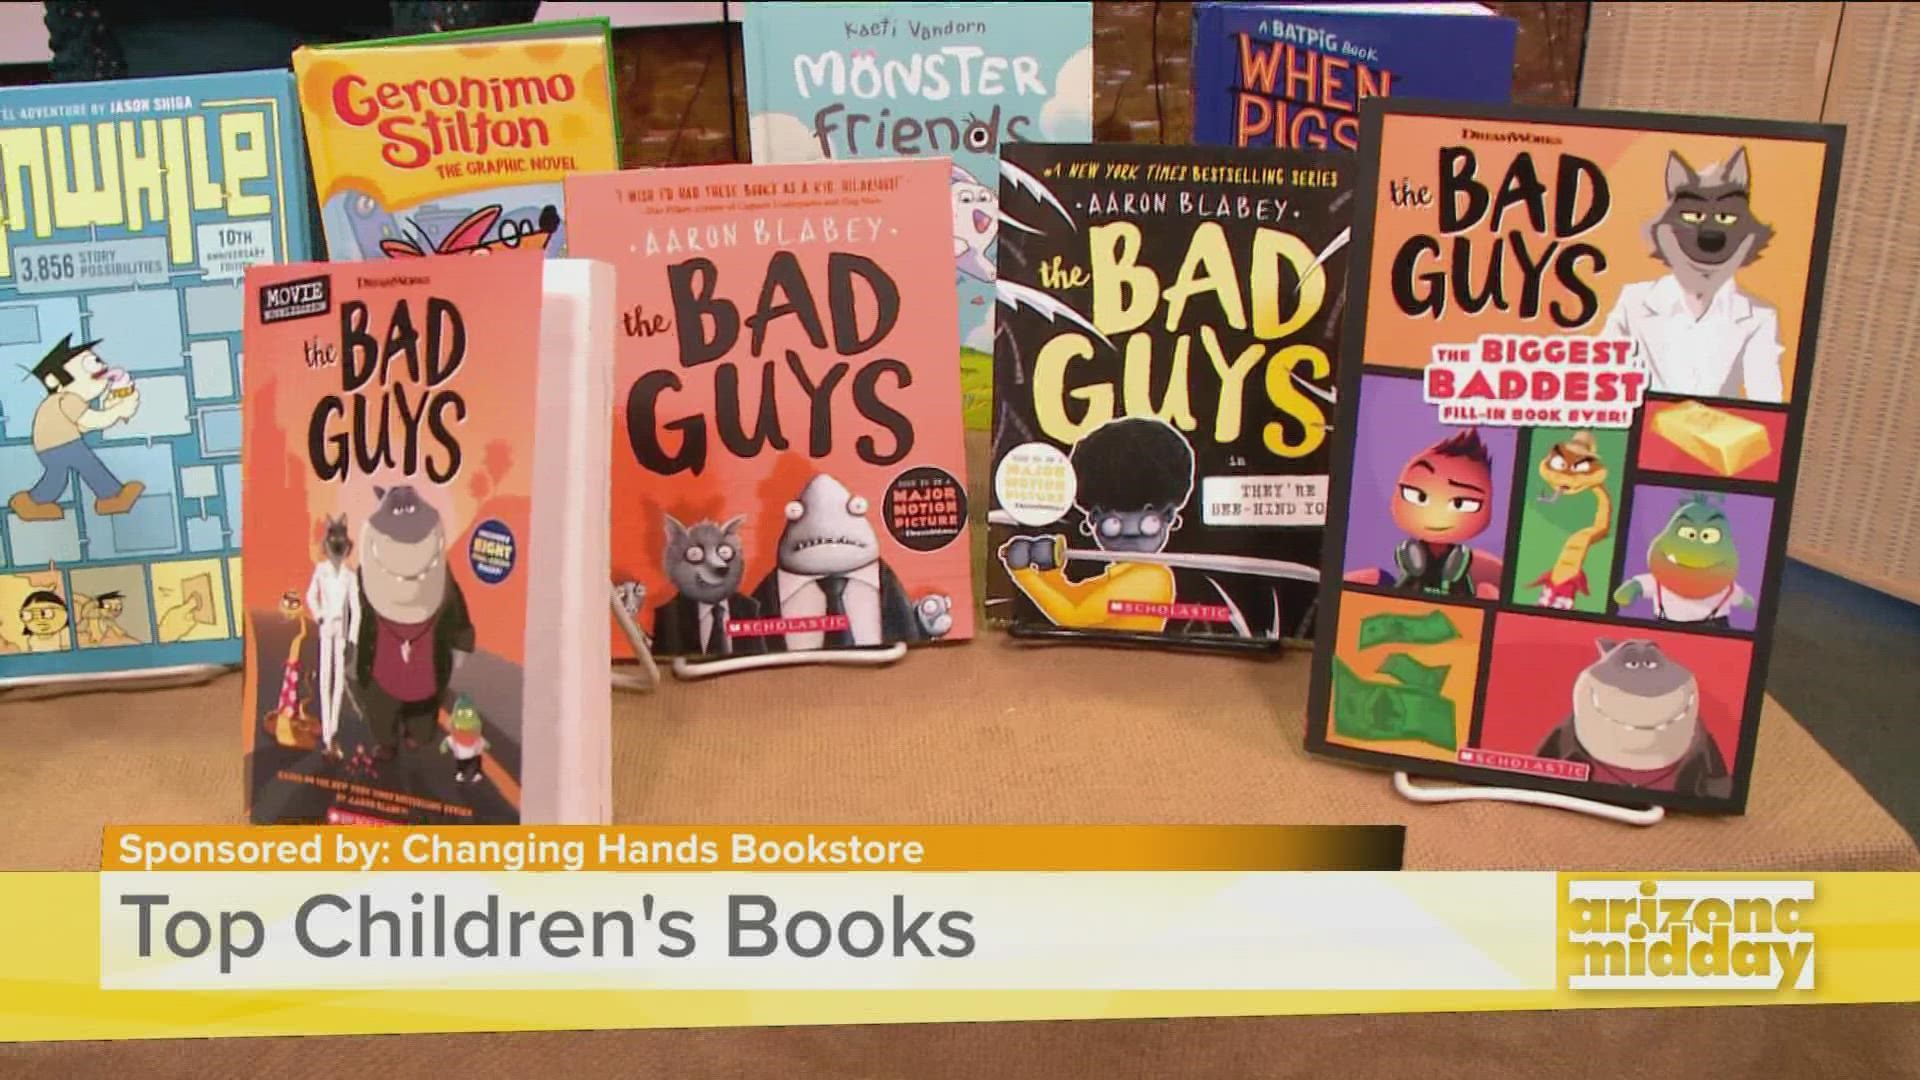 Brandi Stewart, from Changing Hands Bookstore, shows us "The Bad Guys" book collection that's now a movie plus her other top picks for kids